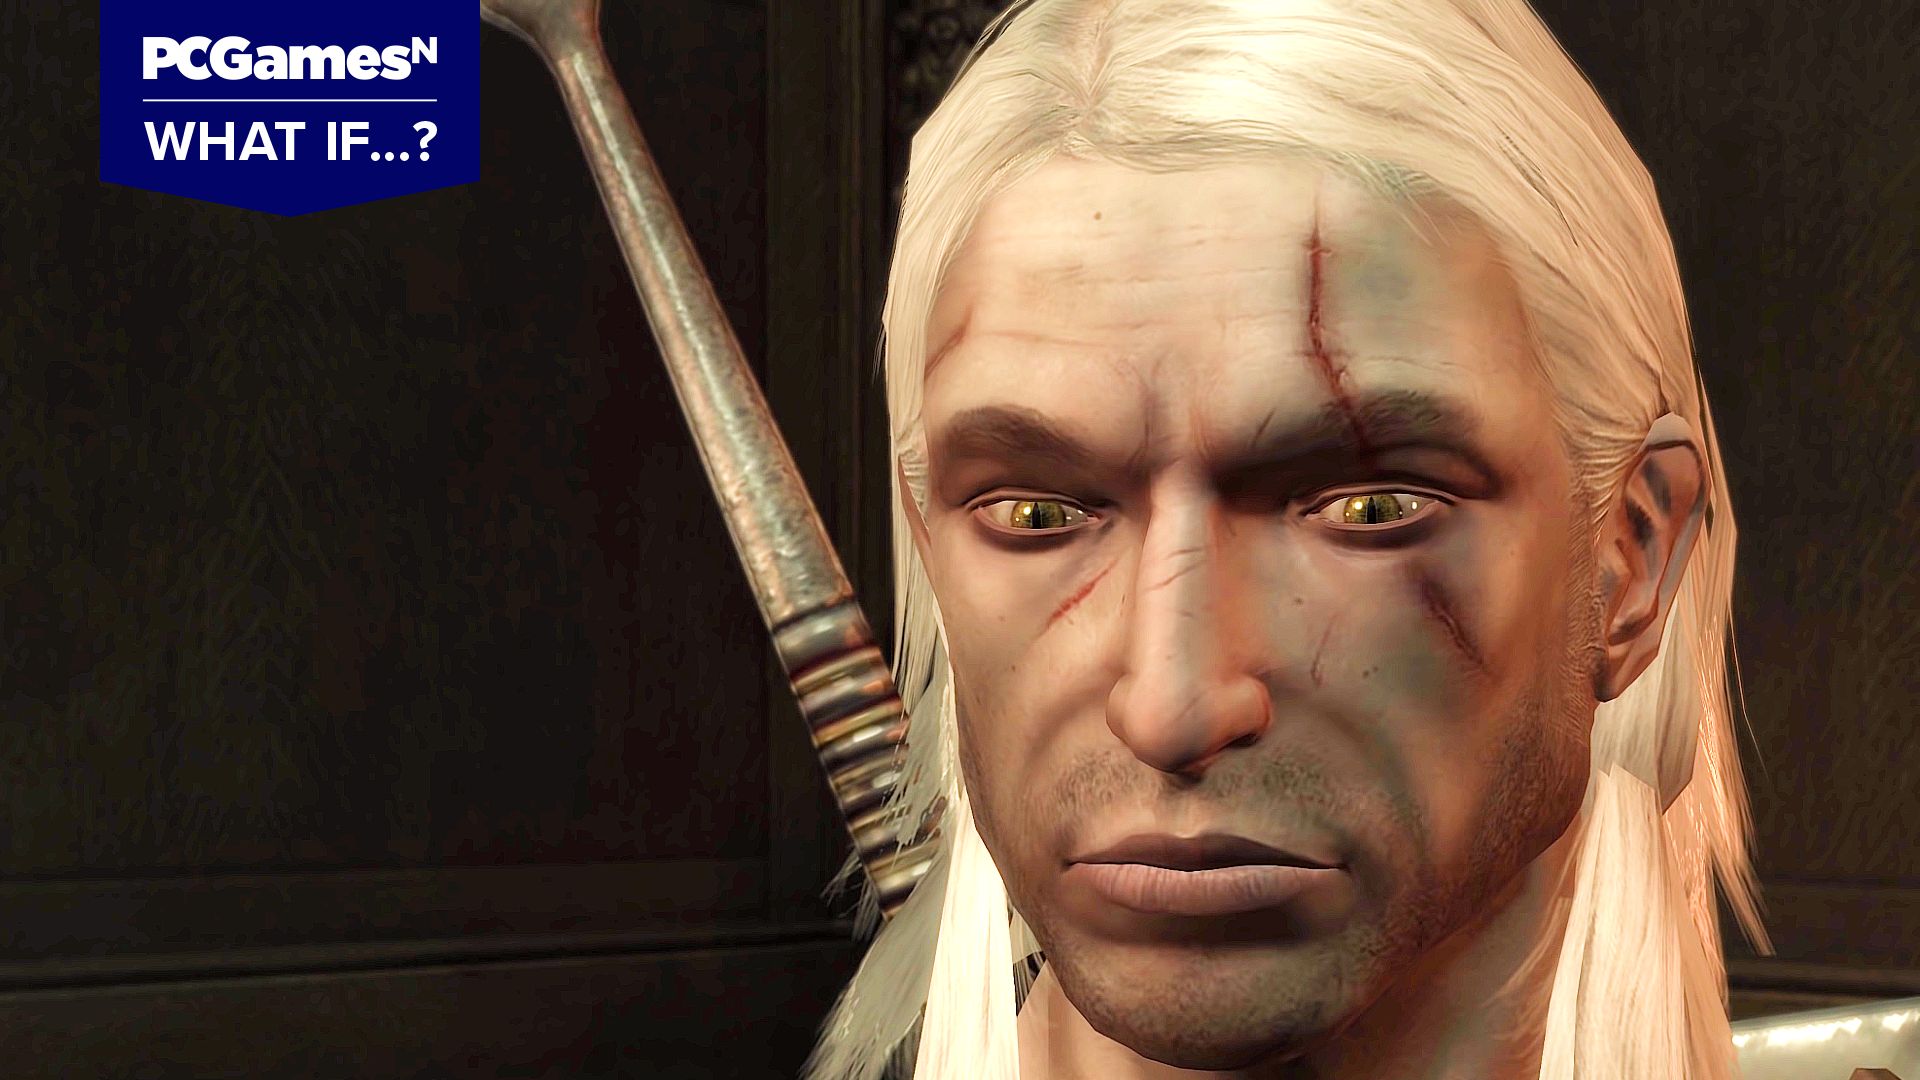 THE WITCHER 1 (2007) TW1 Geralt face (updated) at The Witcher 3